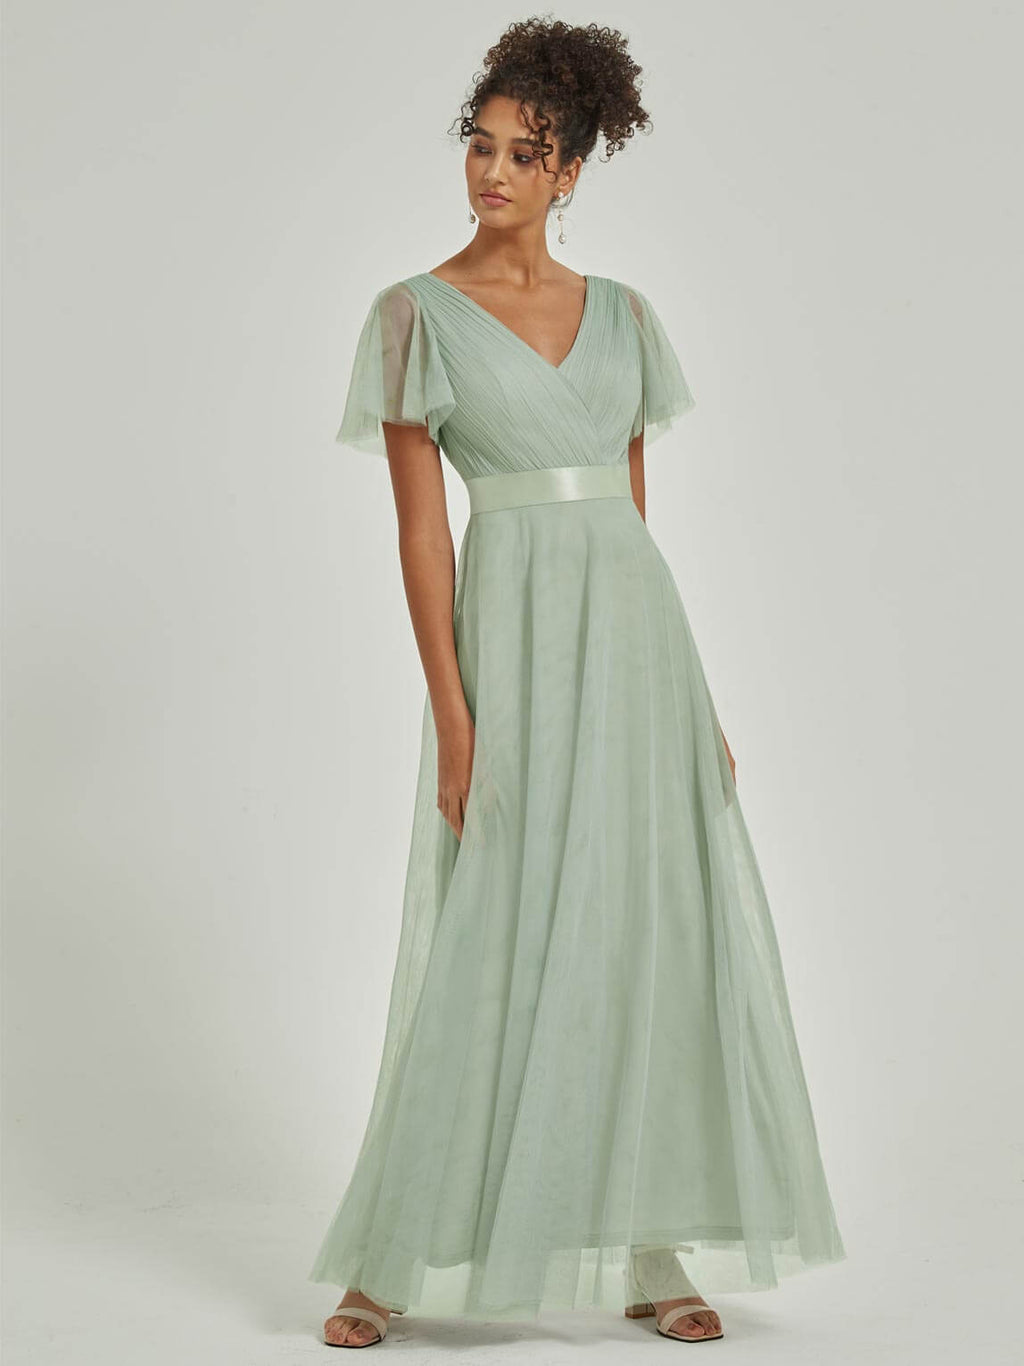 NZ Bridal Sage Green V Neck Empire Flowy Tulle Maxi bridesmaid dresses 07962ep Lucy a